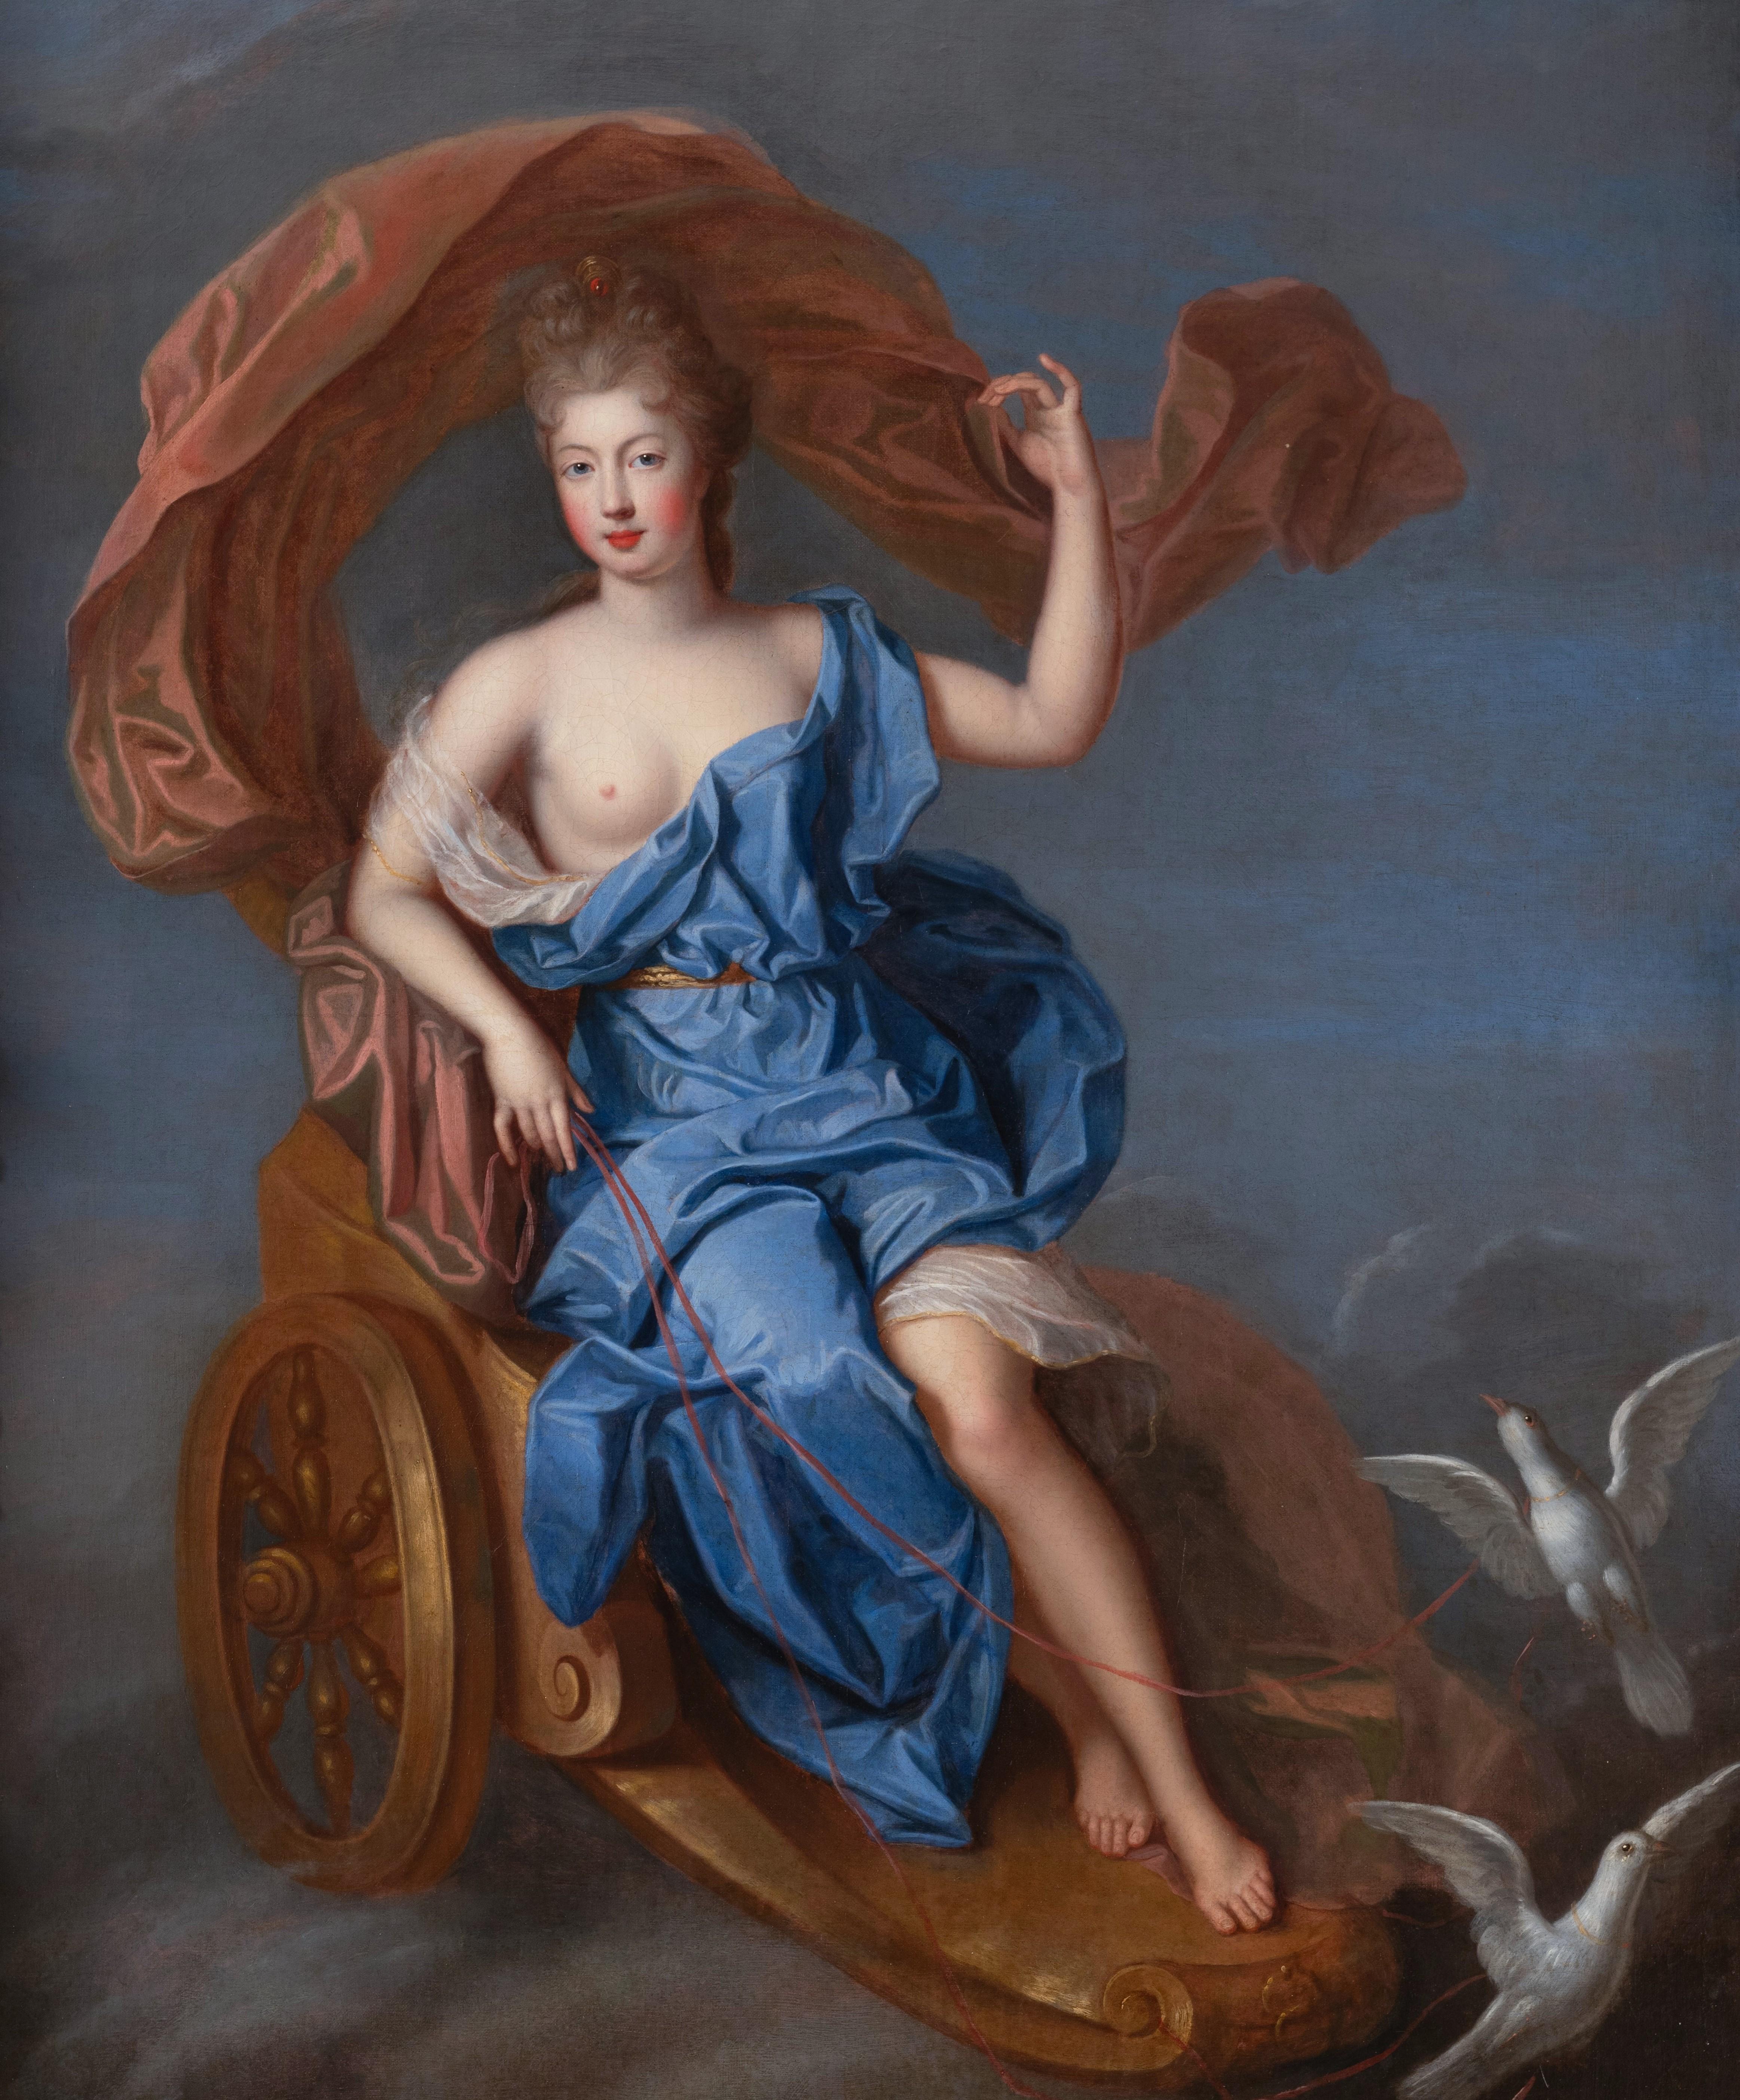 Late 17th century portrait of a French princess, daughter of Louis XIV - Painting by Pierre Gobert